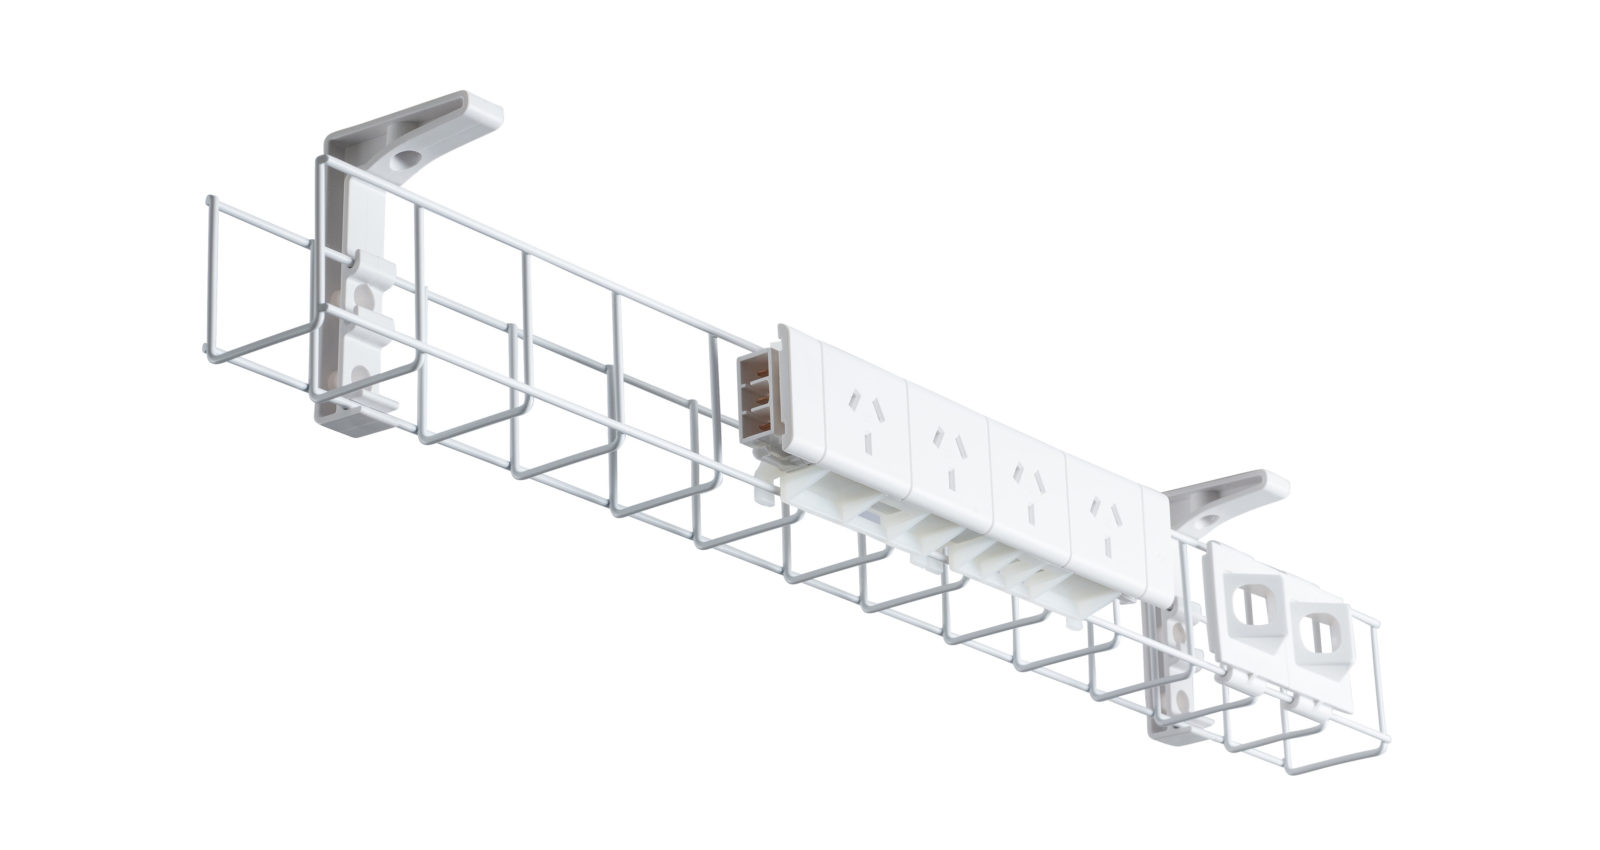 Vertilift 2-Leg Electric Frame Wire Grid Cable Trays